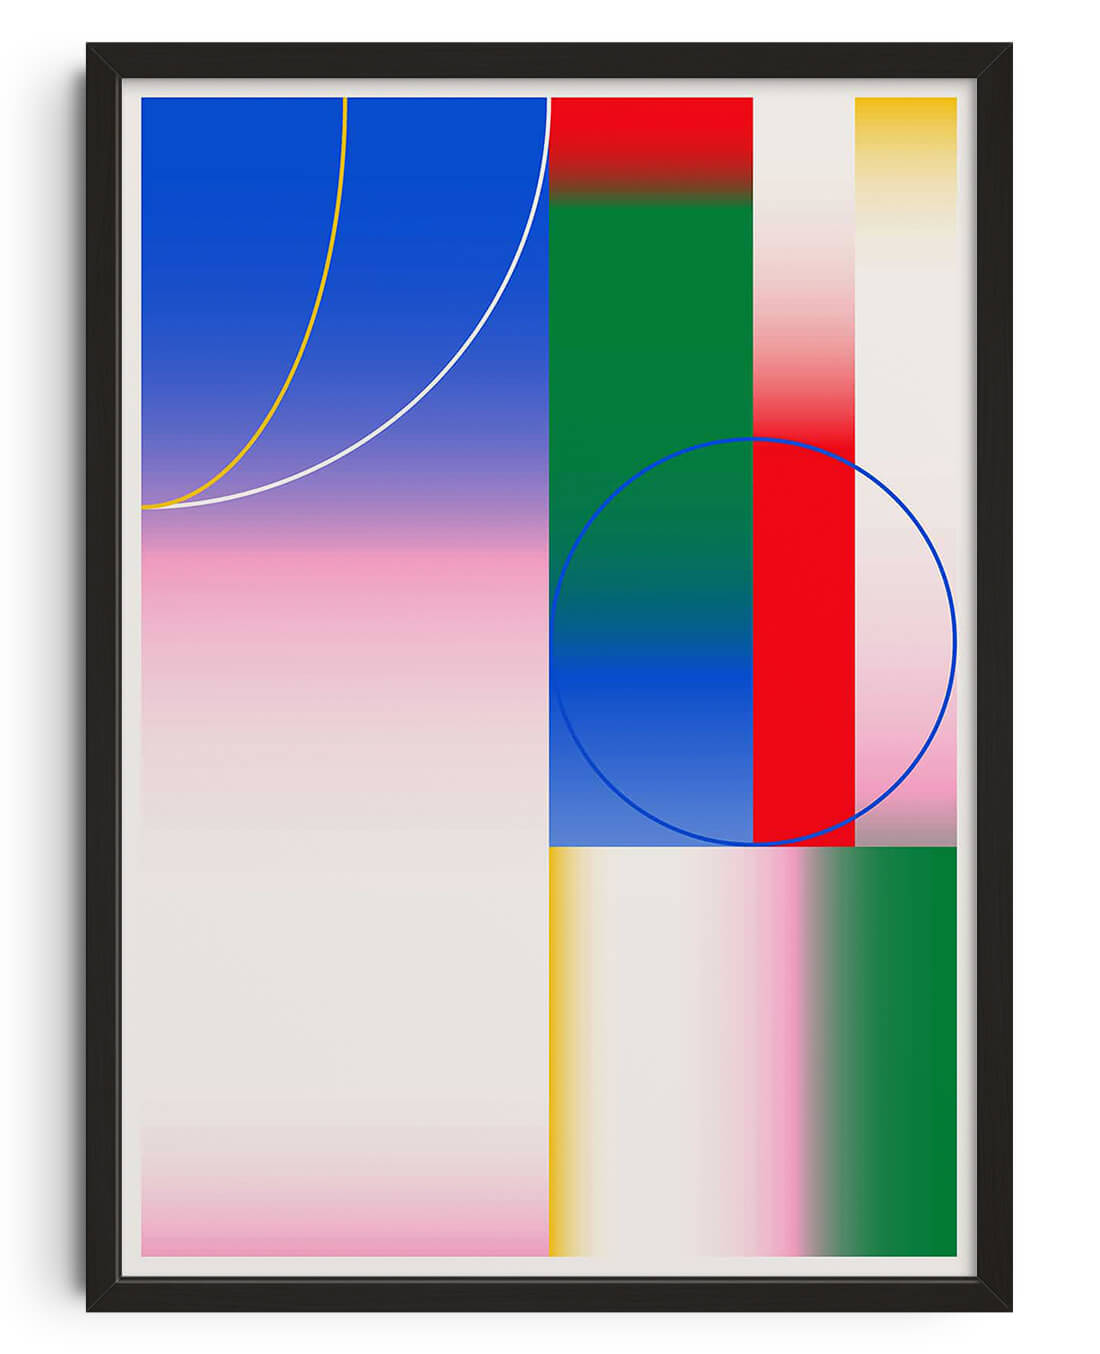 Gradient Study 01 by Jerry-Lee Bosmans contemporary wall art print from DROOL